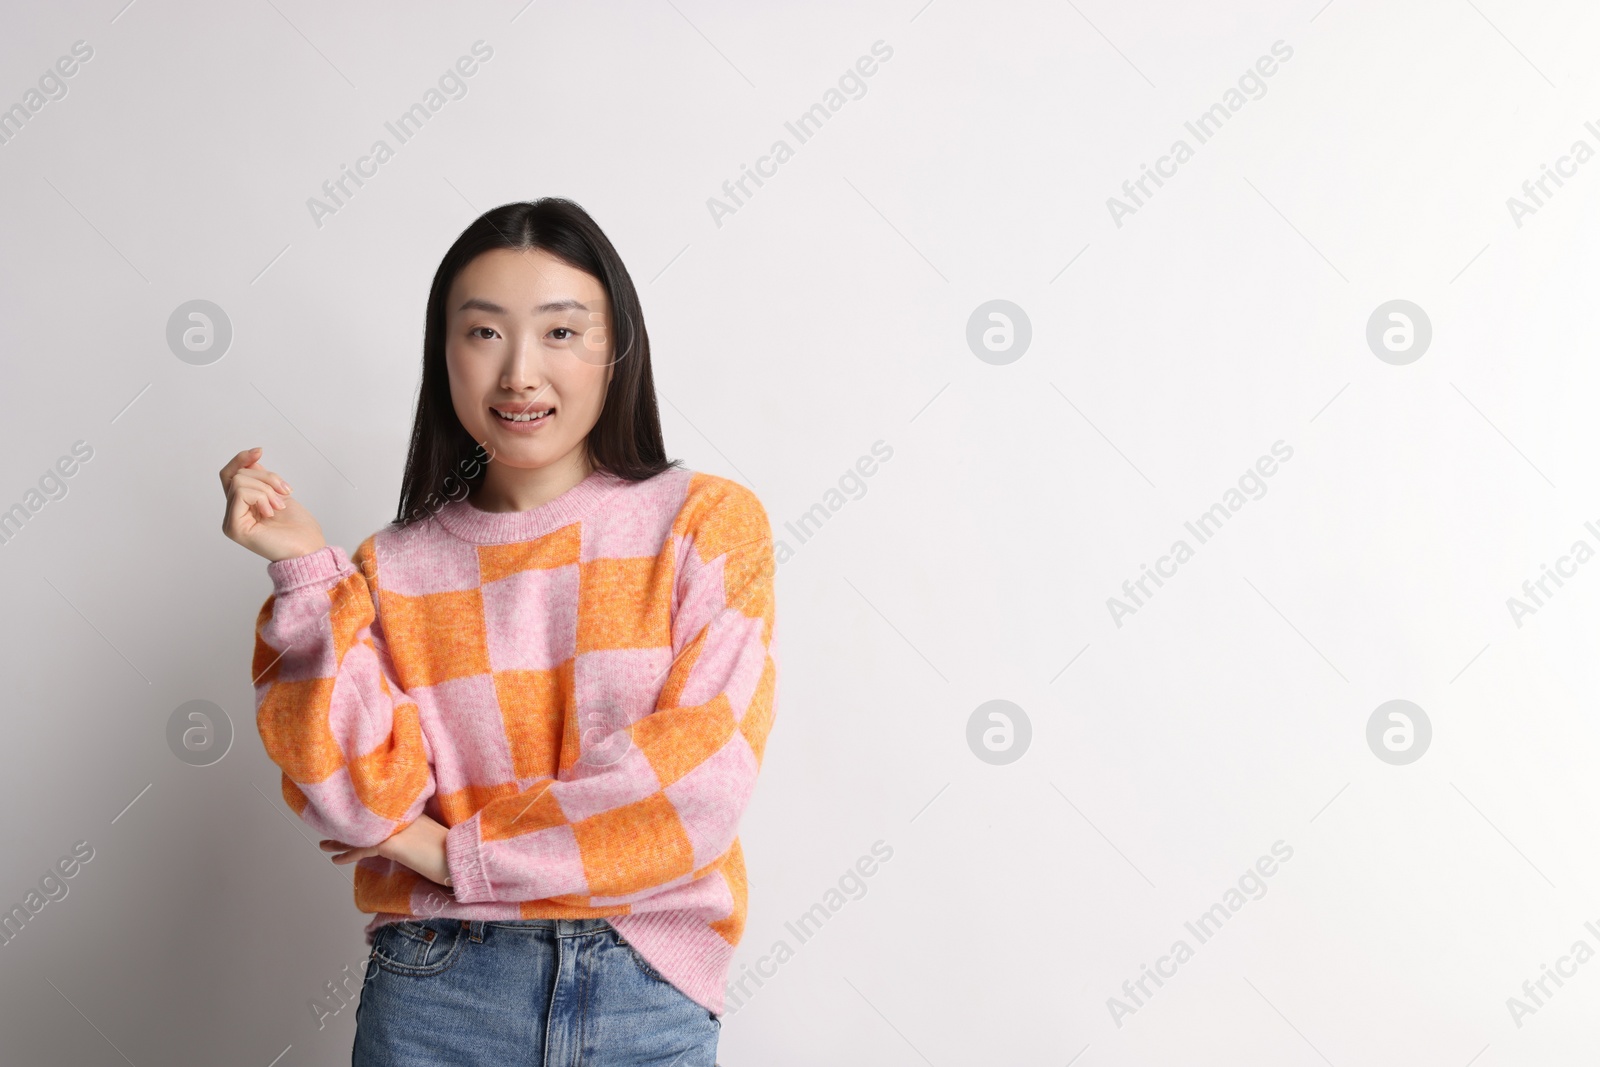 Photo of Portrait of smiling woman on light background. Space for text